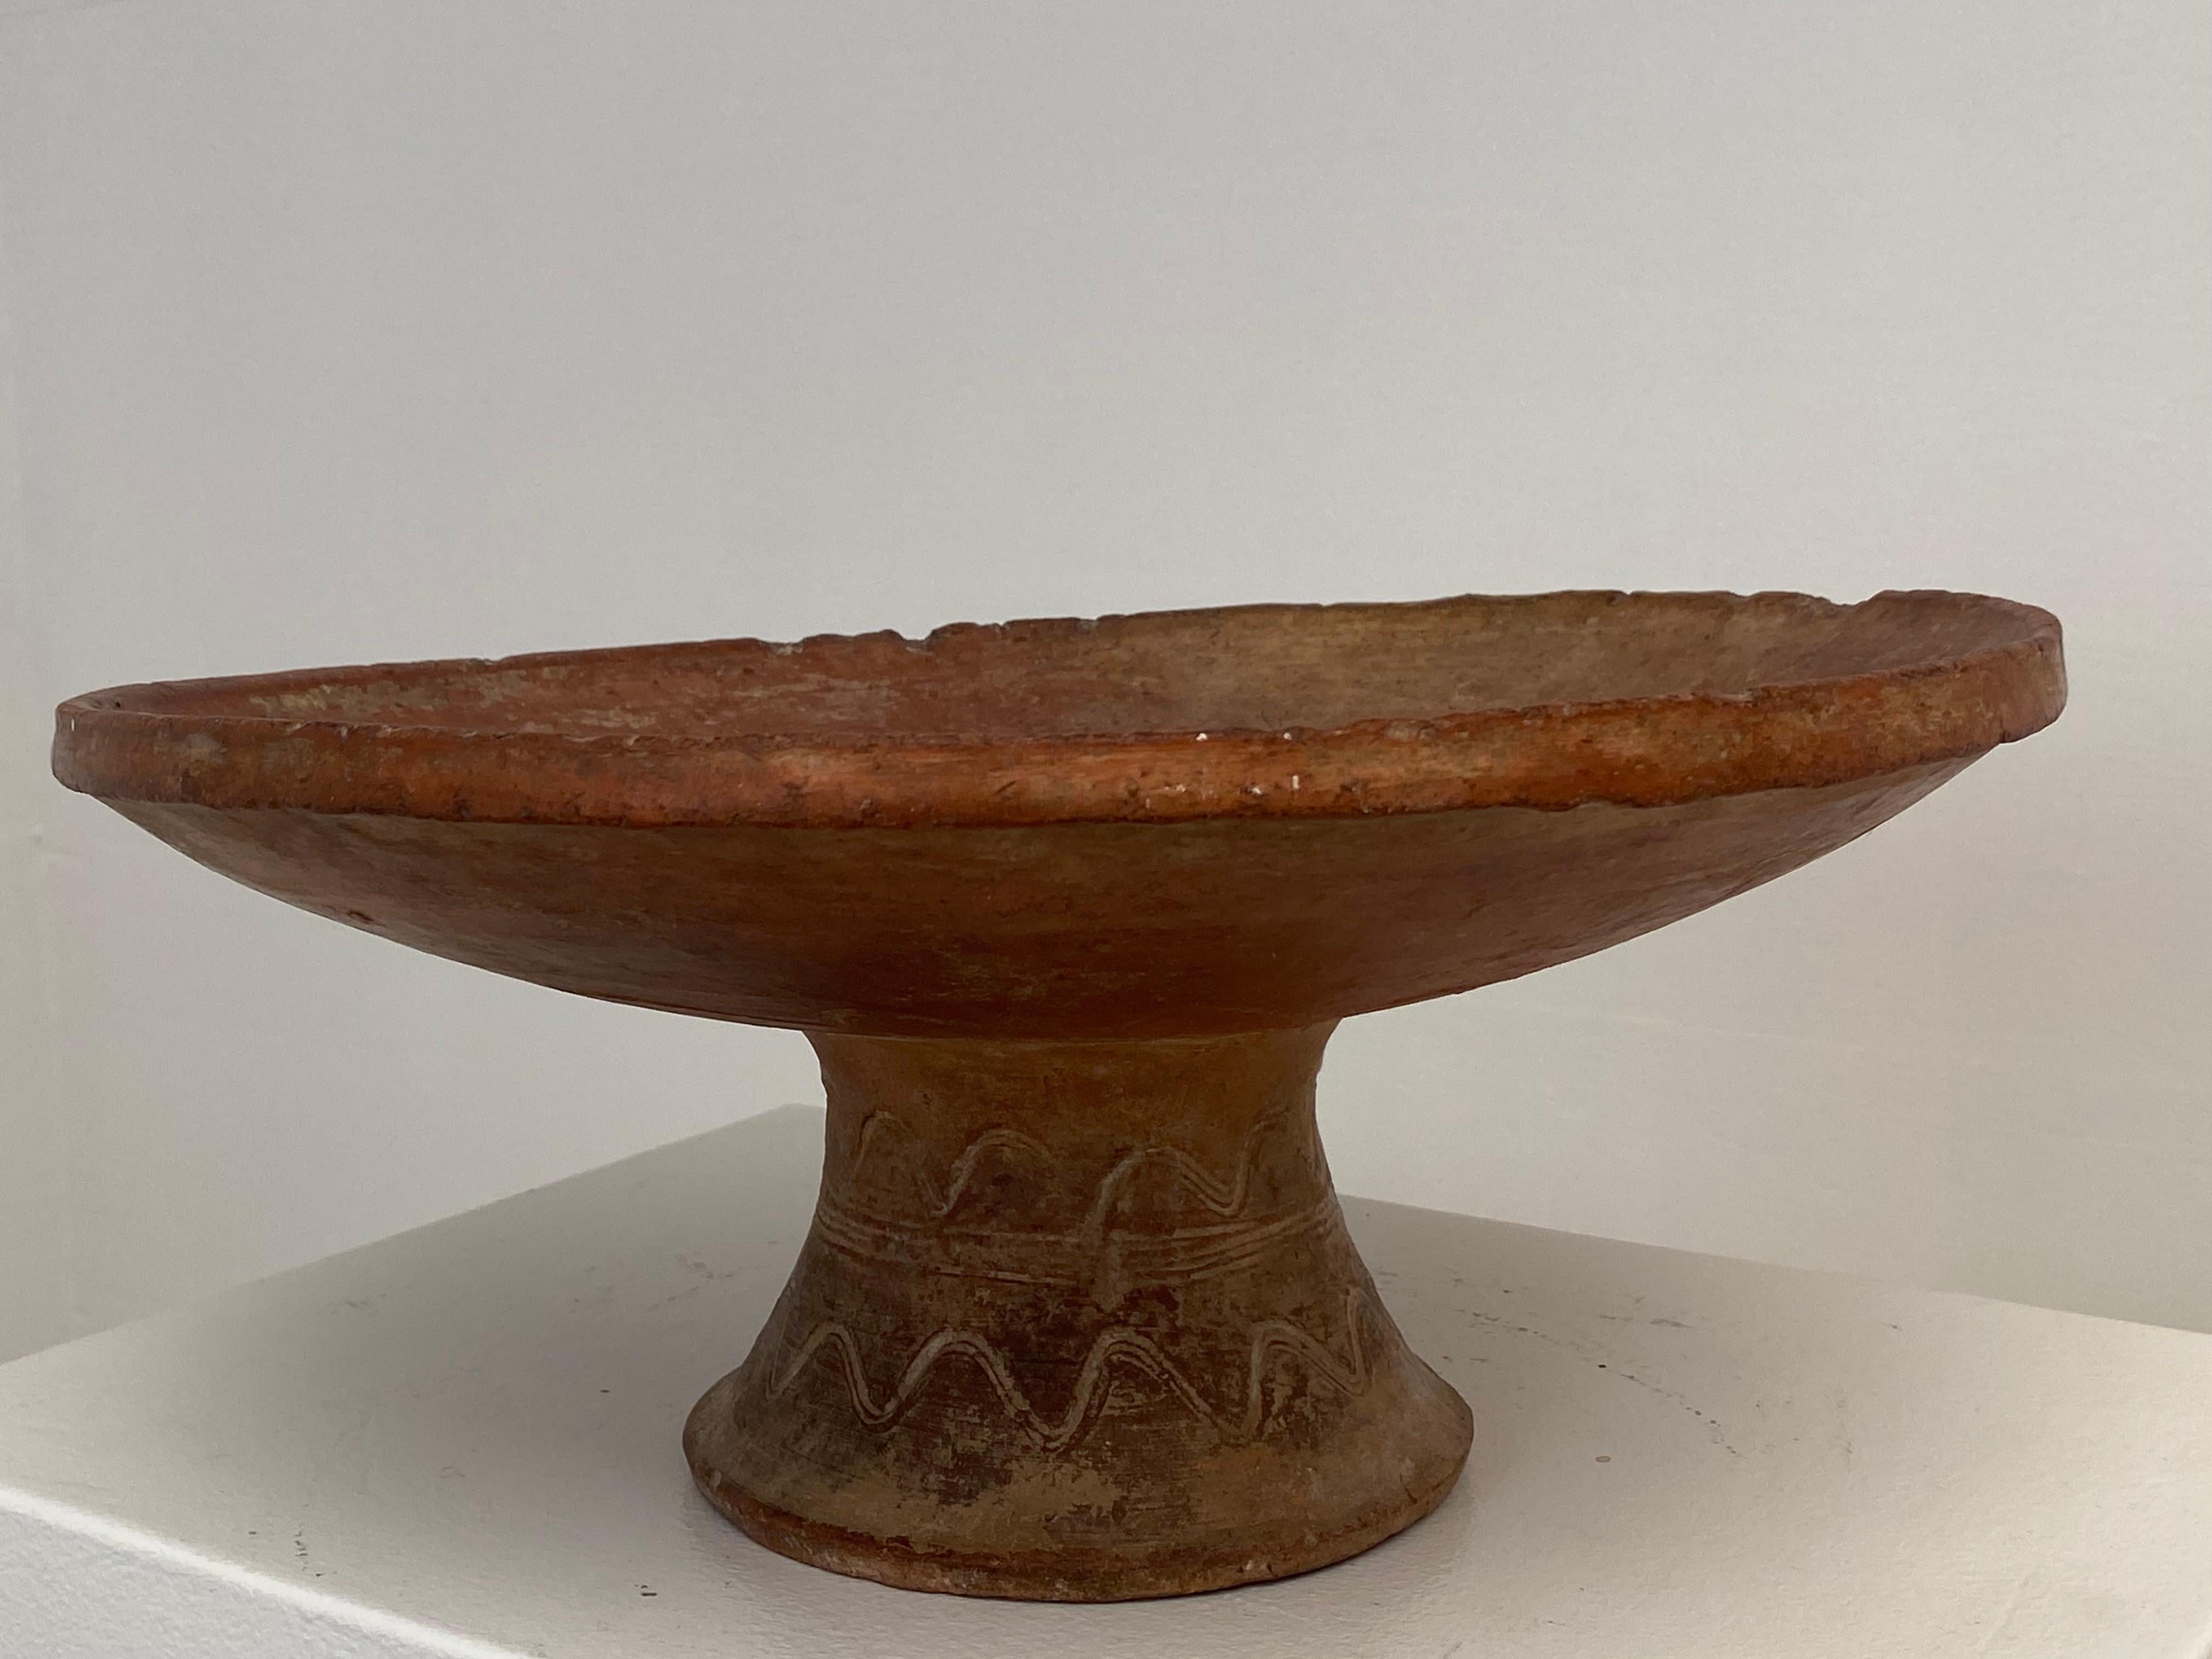 Elegant , Antique terracotta Bowl on a central foot,
Morocco from around 1920,
the Red Terracotta has a nice shine and antique patina,
decorated with elegant and fine lines,
very decorative object to be used for different purposes